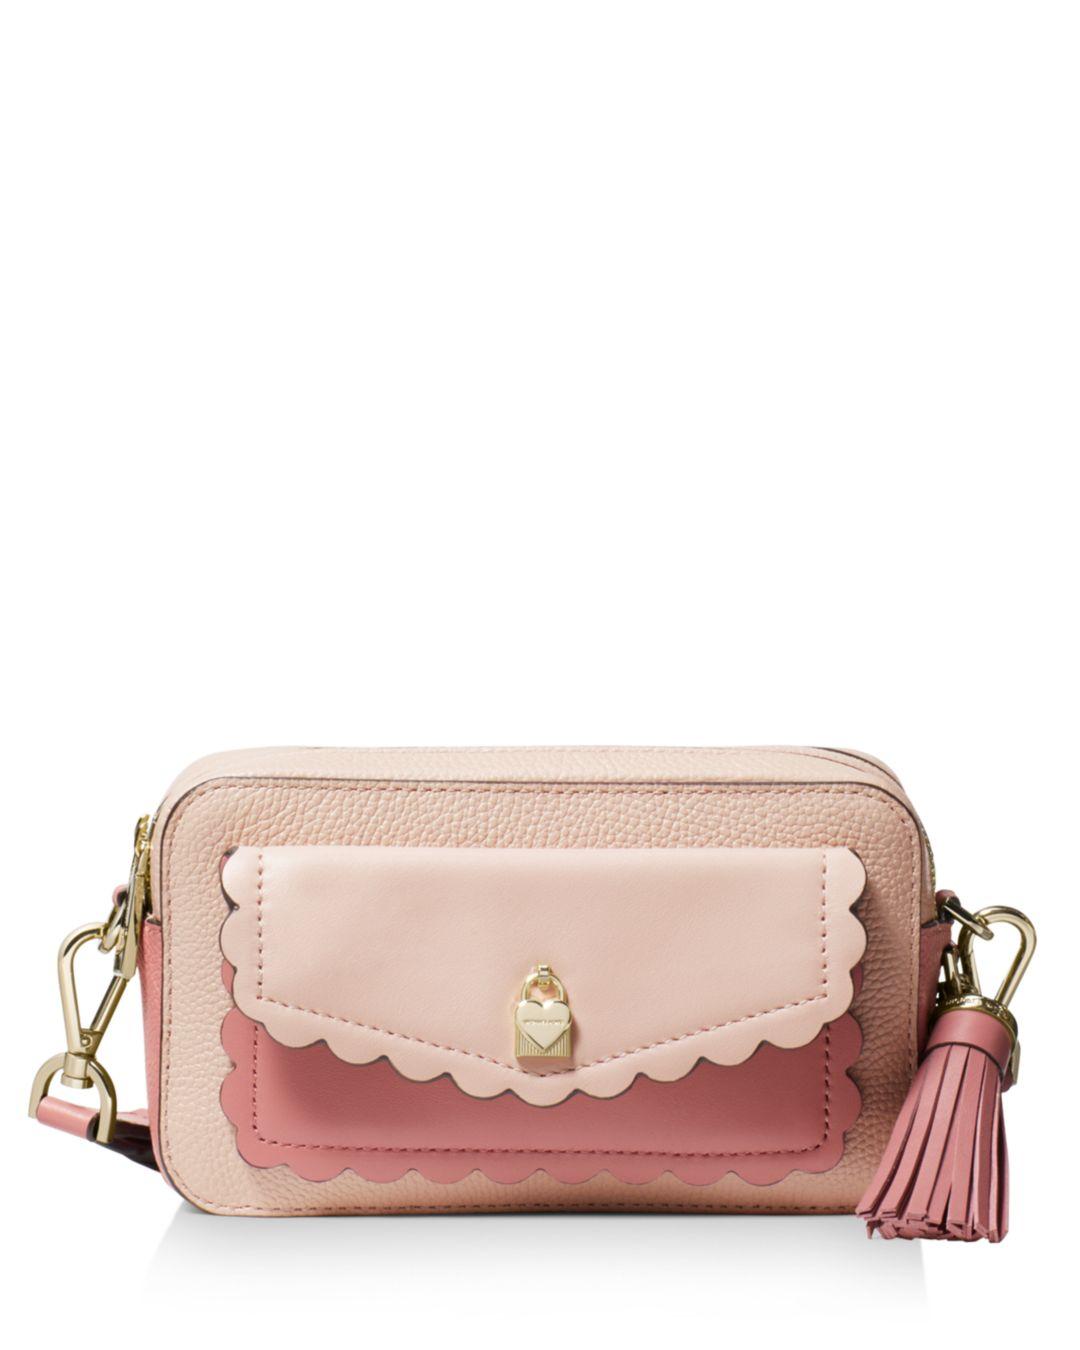 Lyst - MICHAEL Michael Kors Small Leather Crossbody Camera Bag in Pink - Save 16%